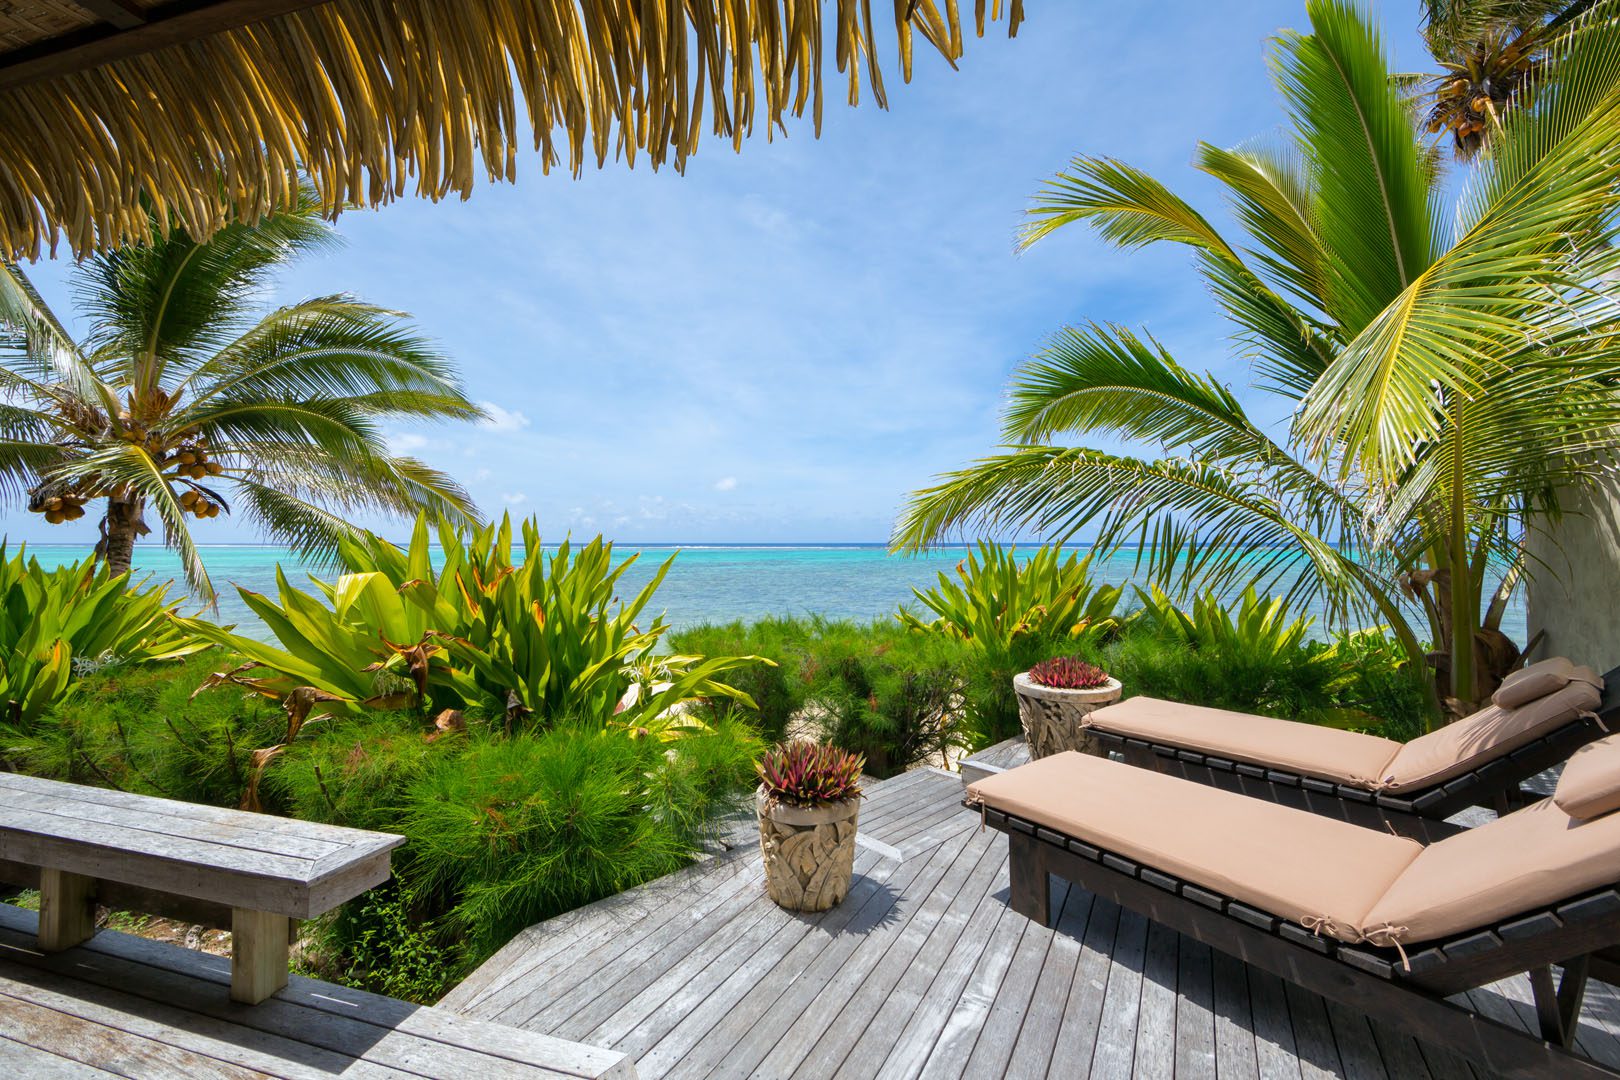 Ultimate beachfront villa view of the deck with loungers set up overlooking the beautiful blue lagoon